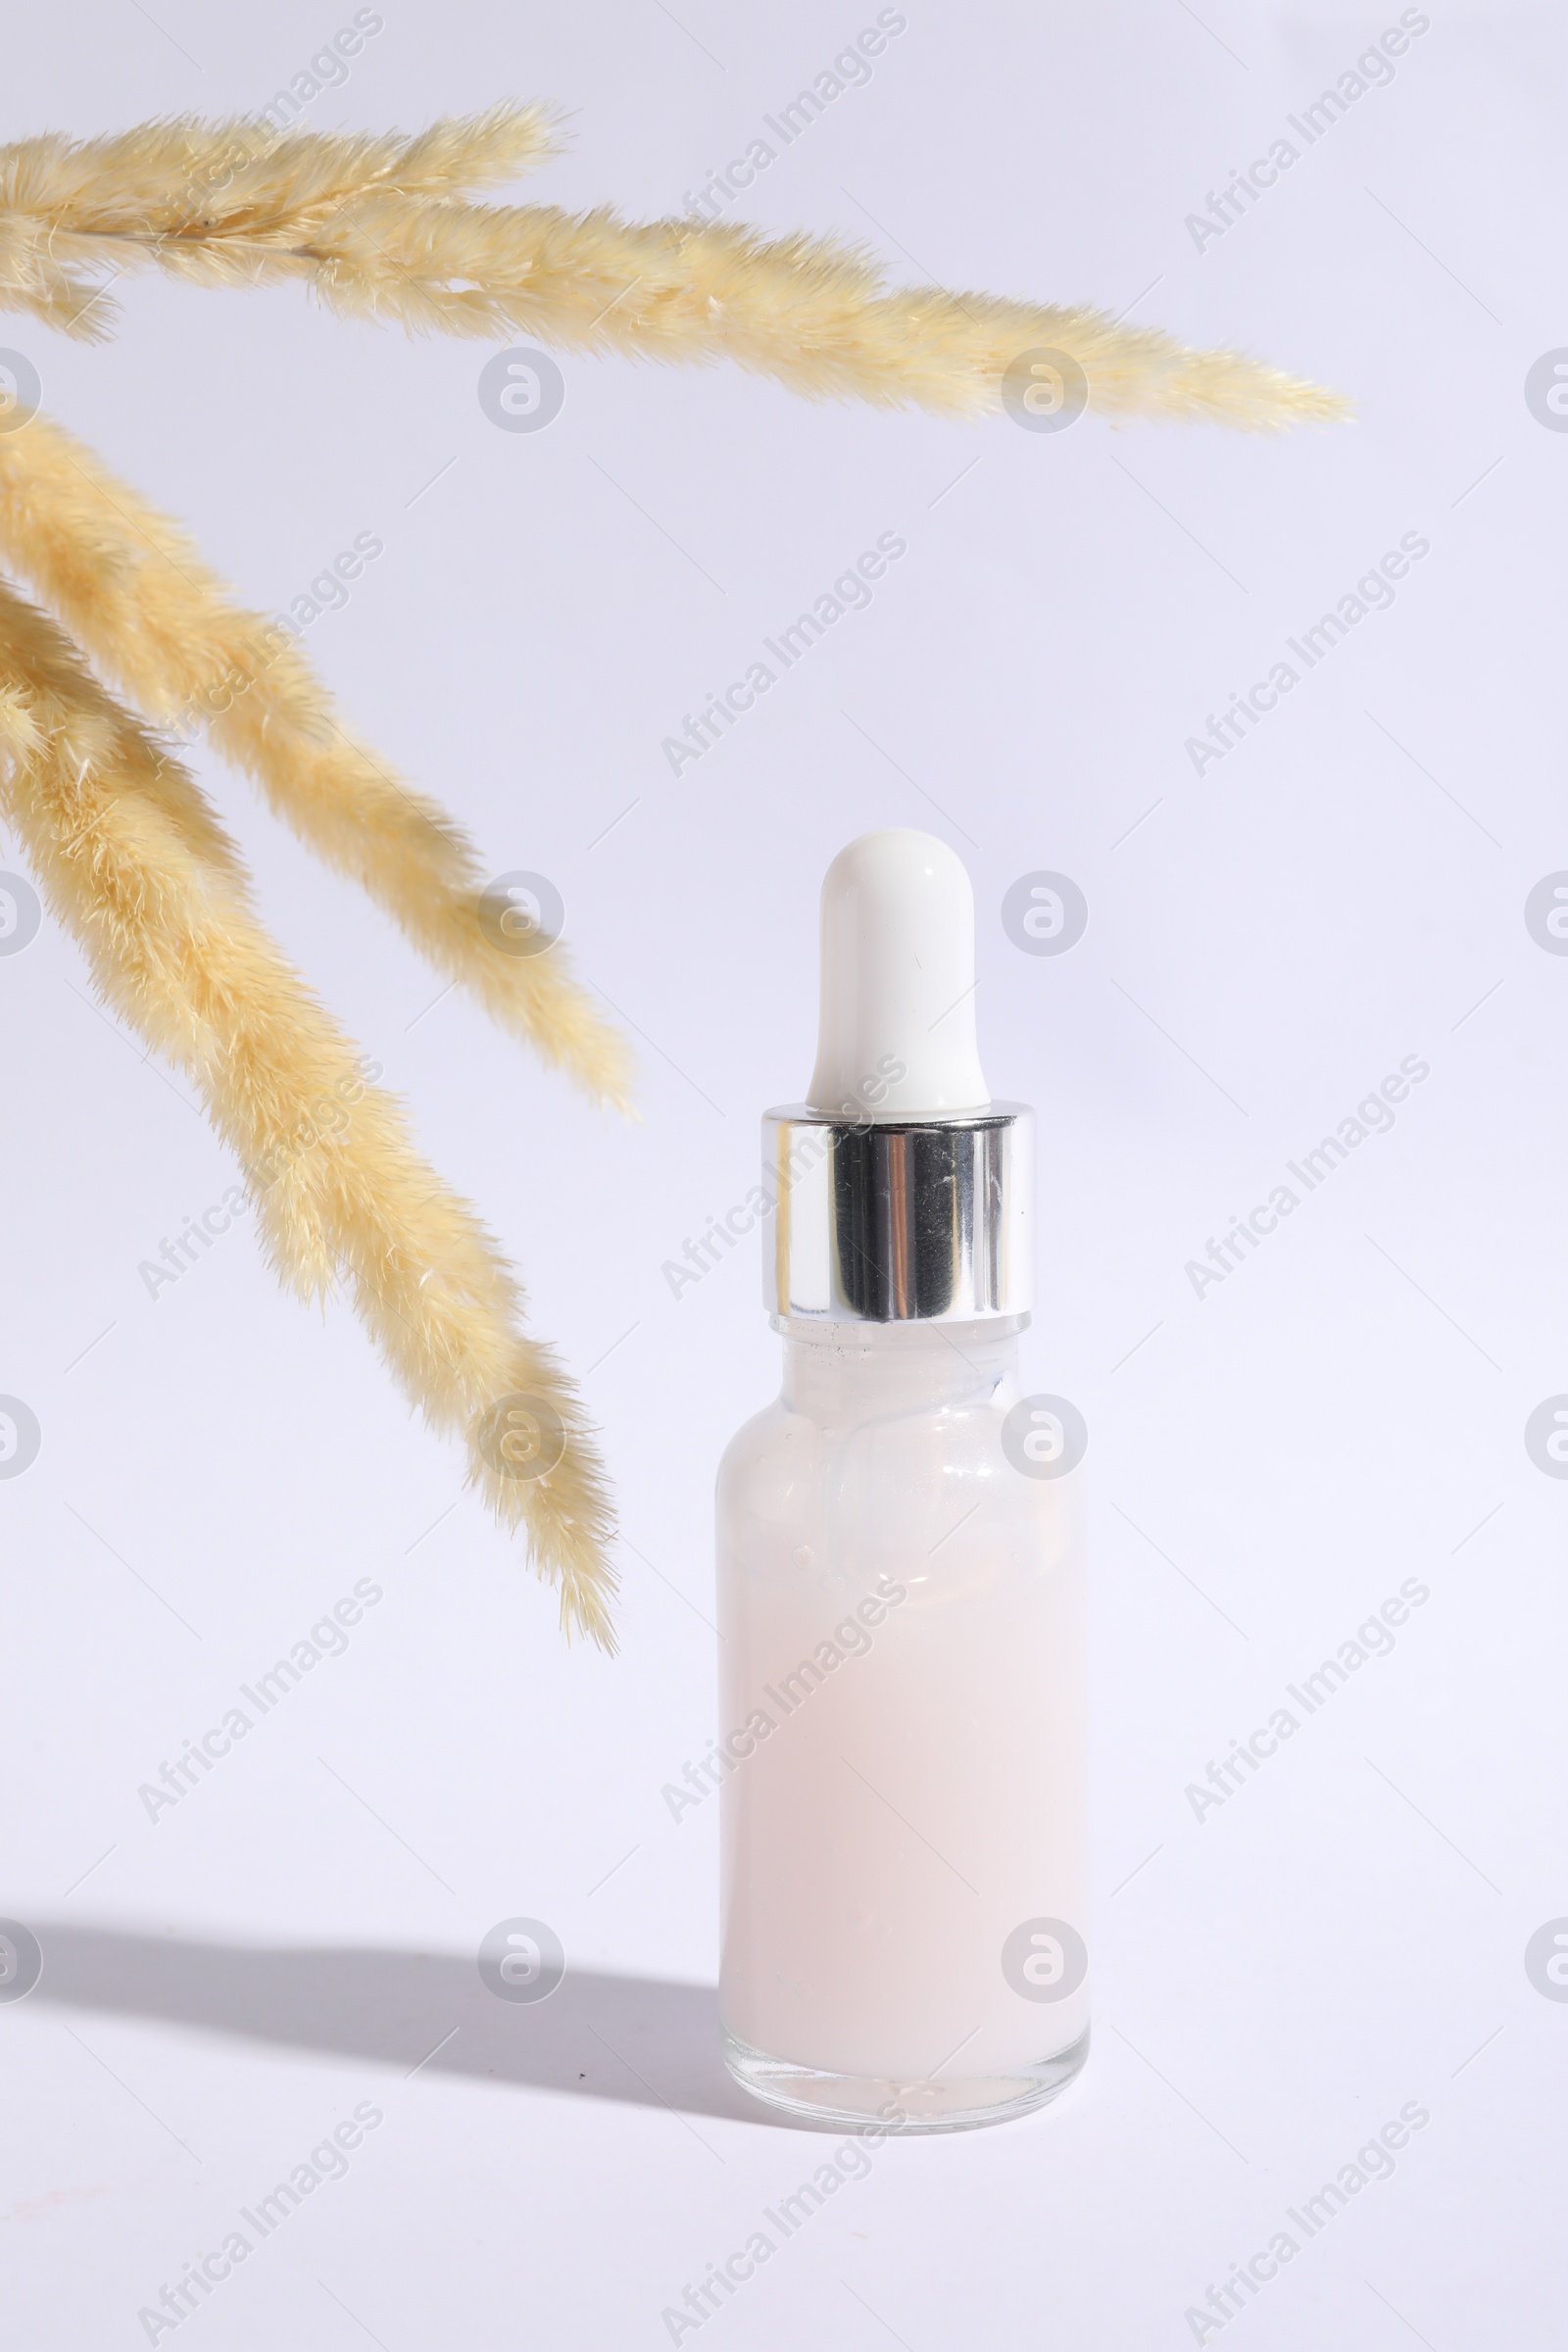 Photo of Bottle of cosmetic serum and dry plant on white background